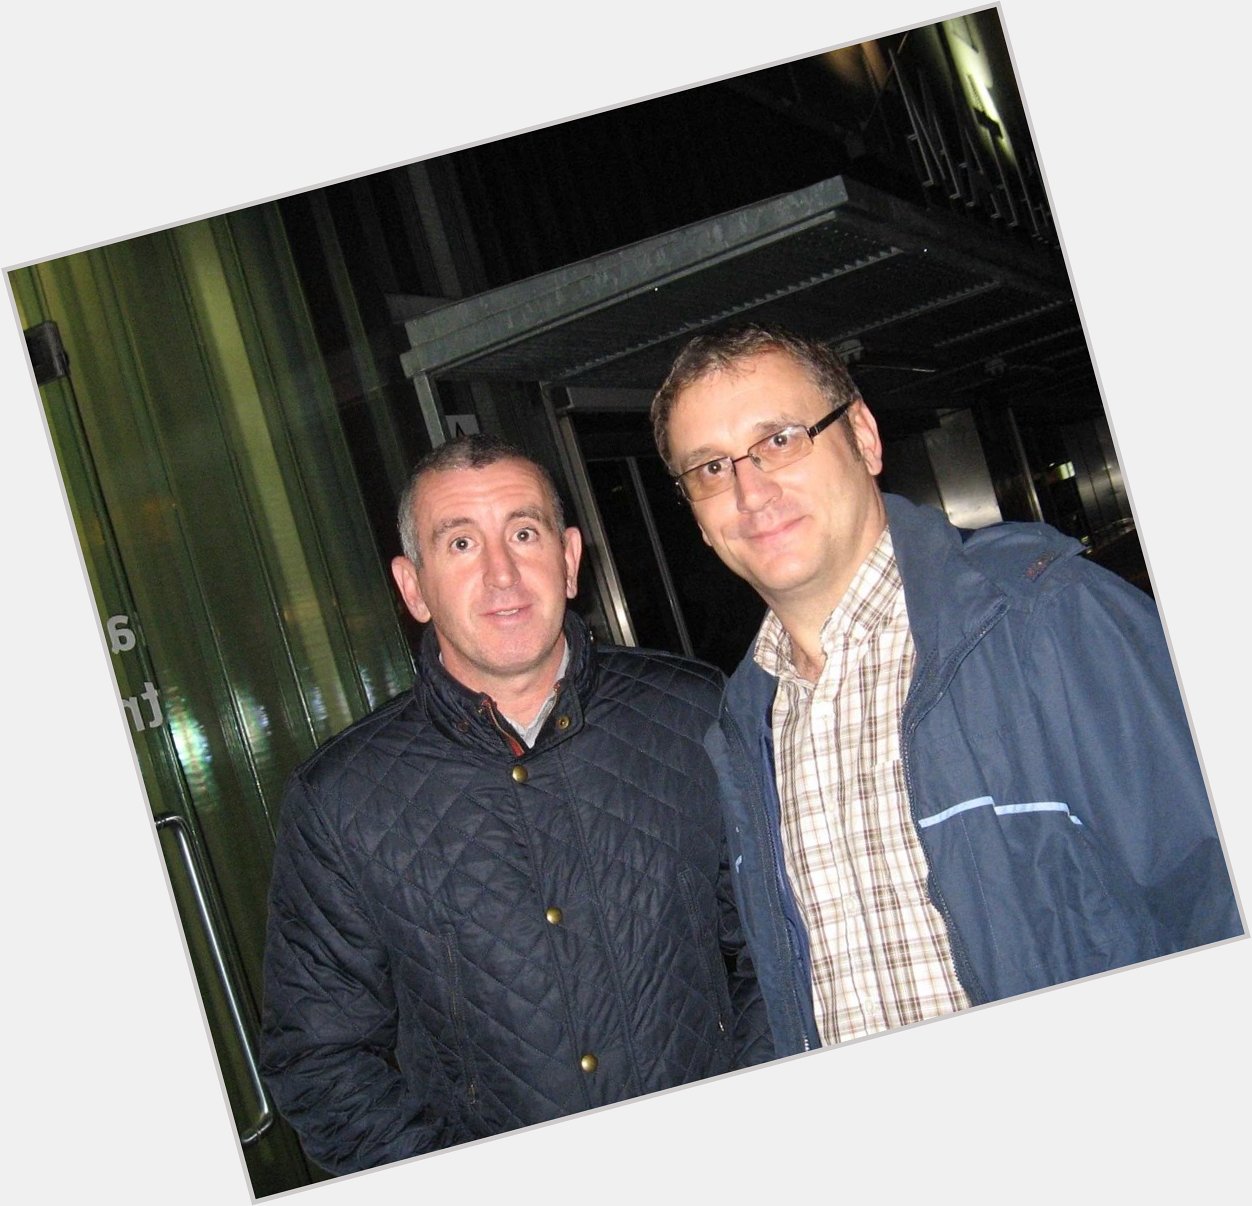 Happy birthday to Arsenal legend Nigel Winterburn! Great player & bloke! (Pity this is the worst ever pic of me!) 